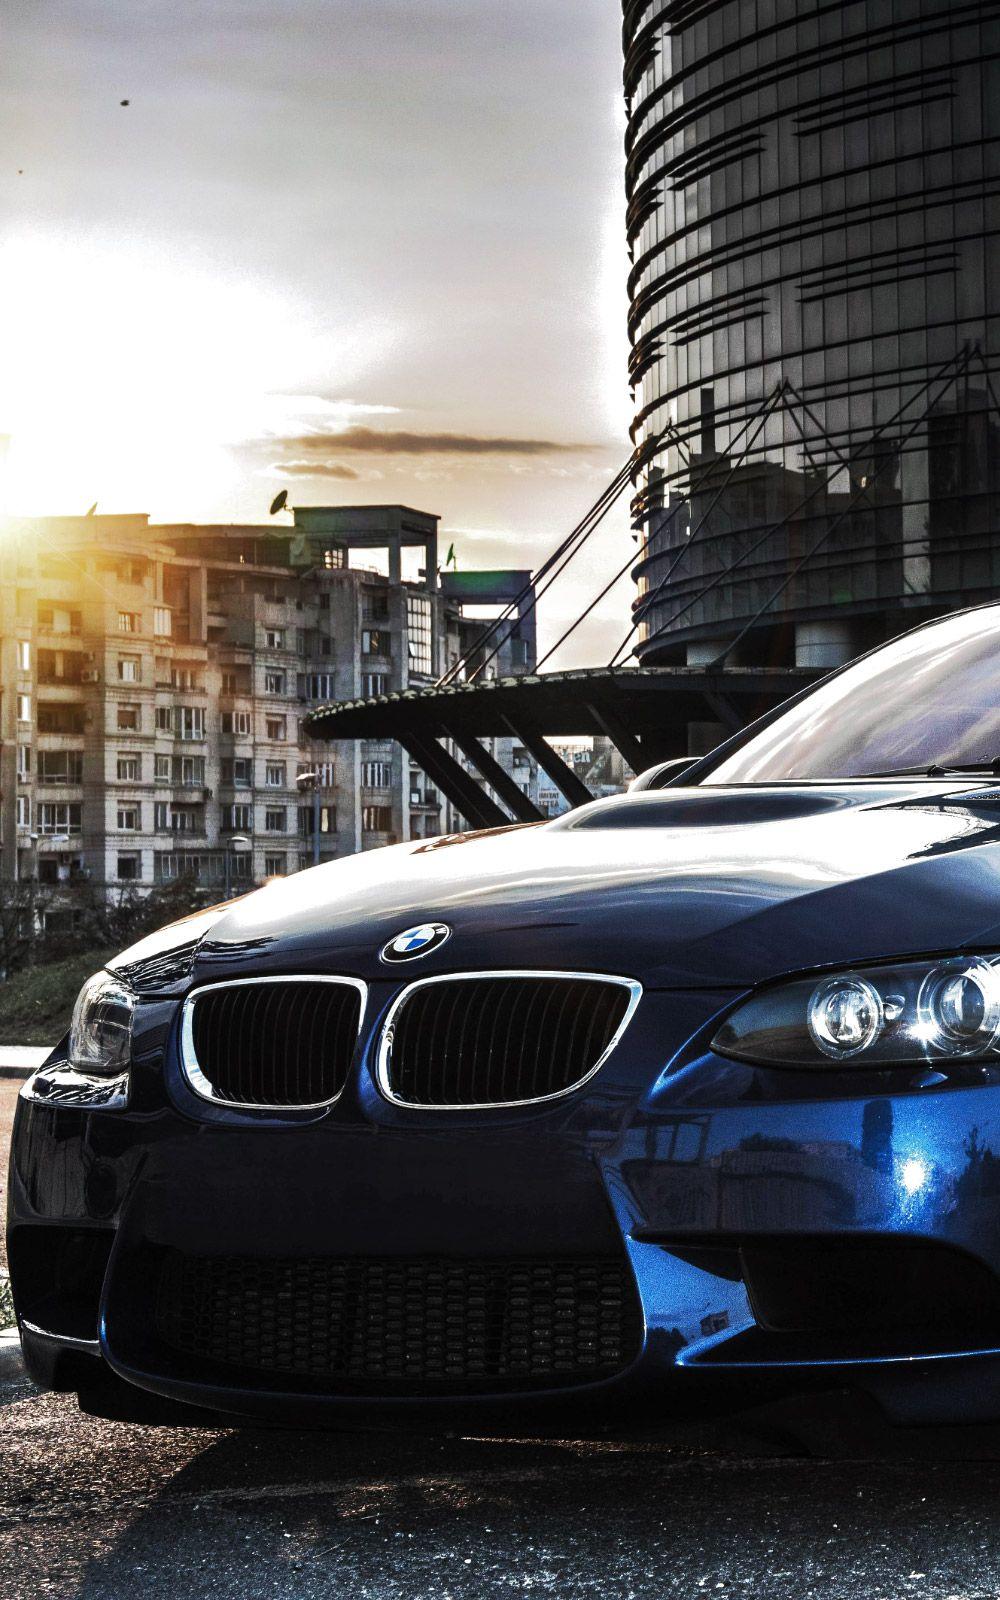 Wallpaper for mobile, Bmw cars and BMW